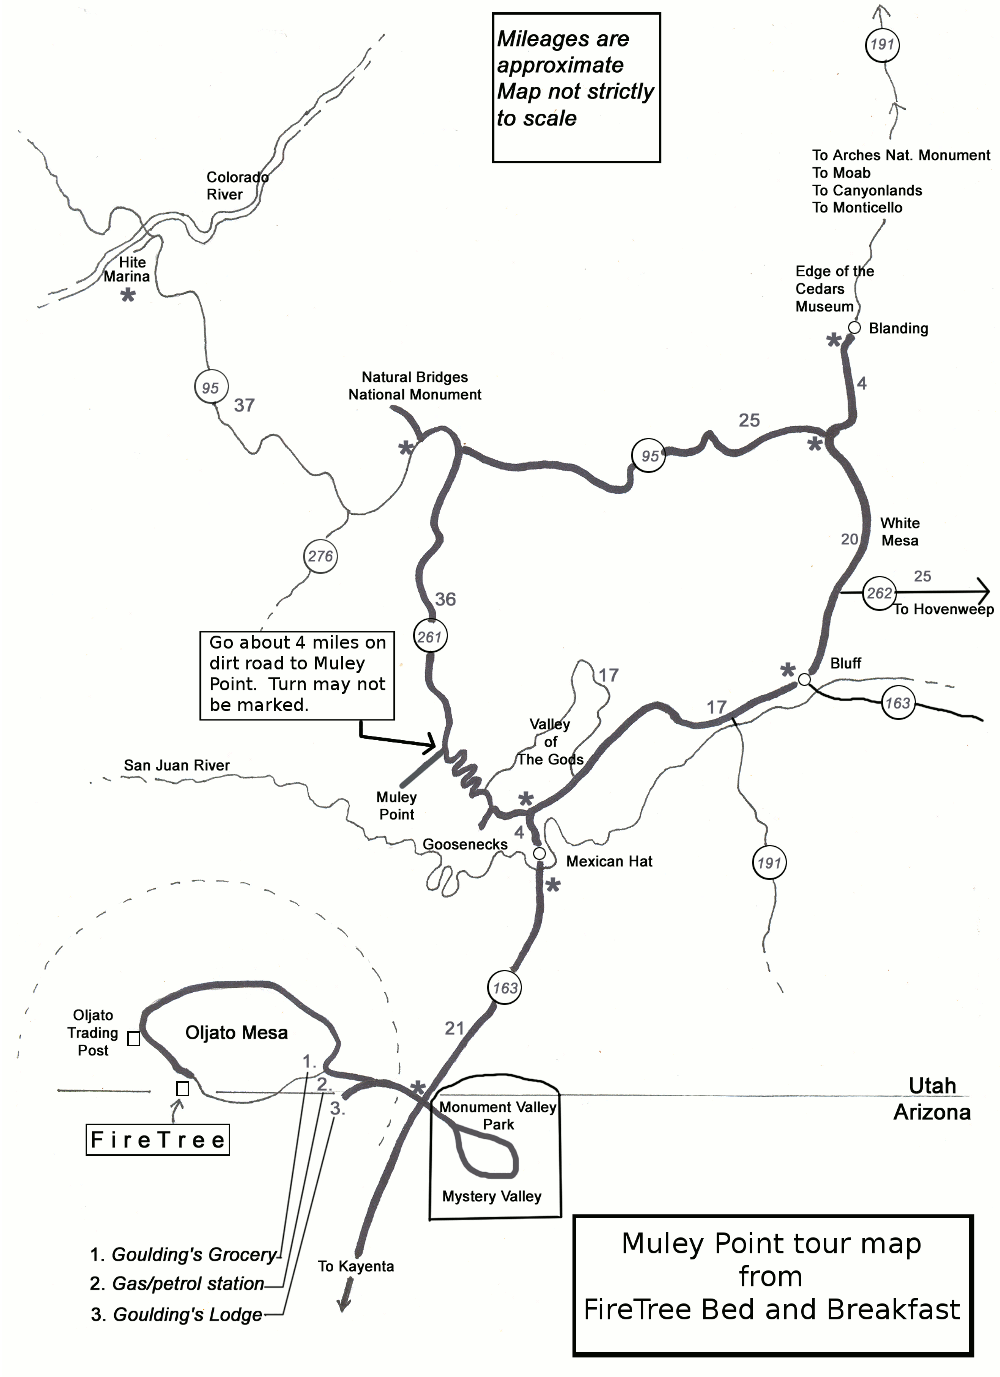 Muley Point tour map